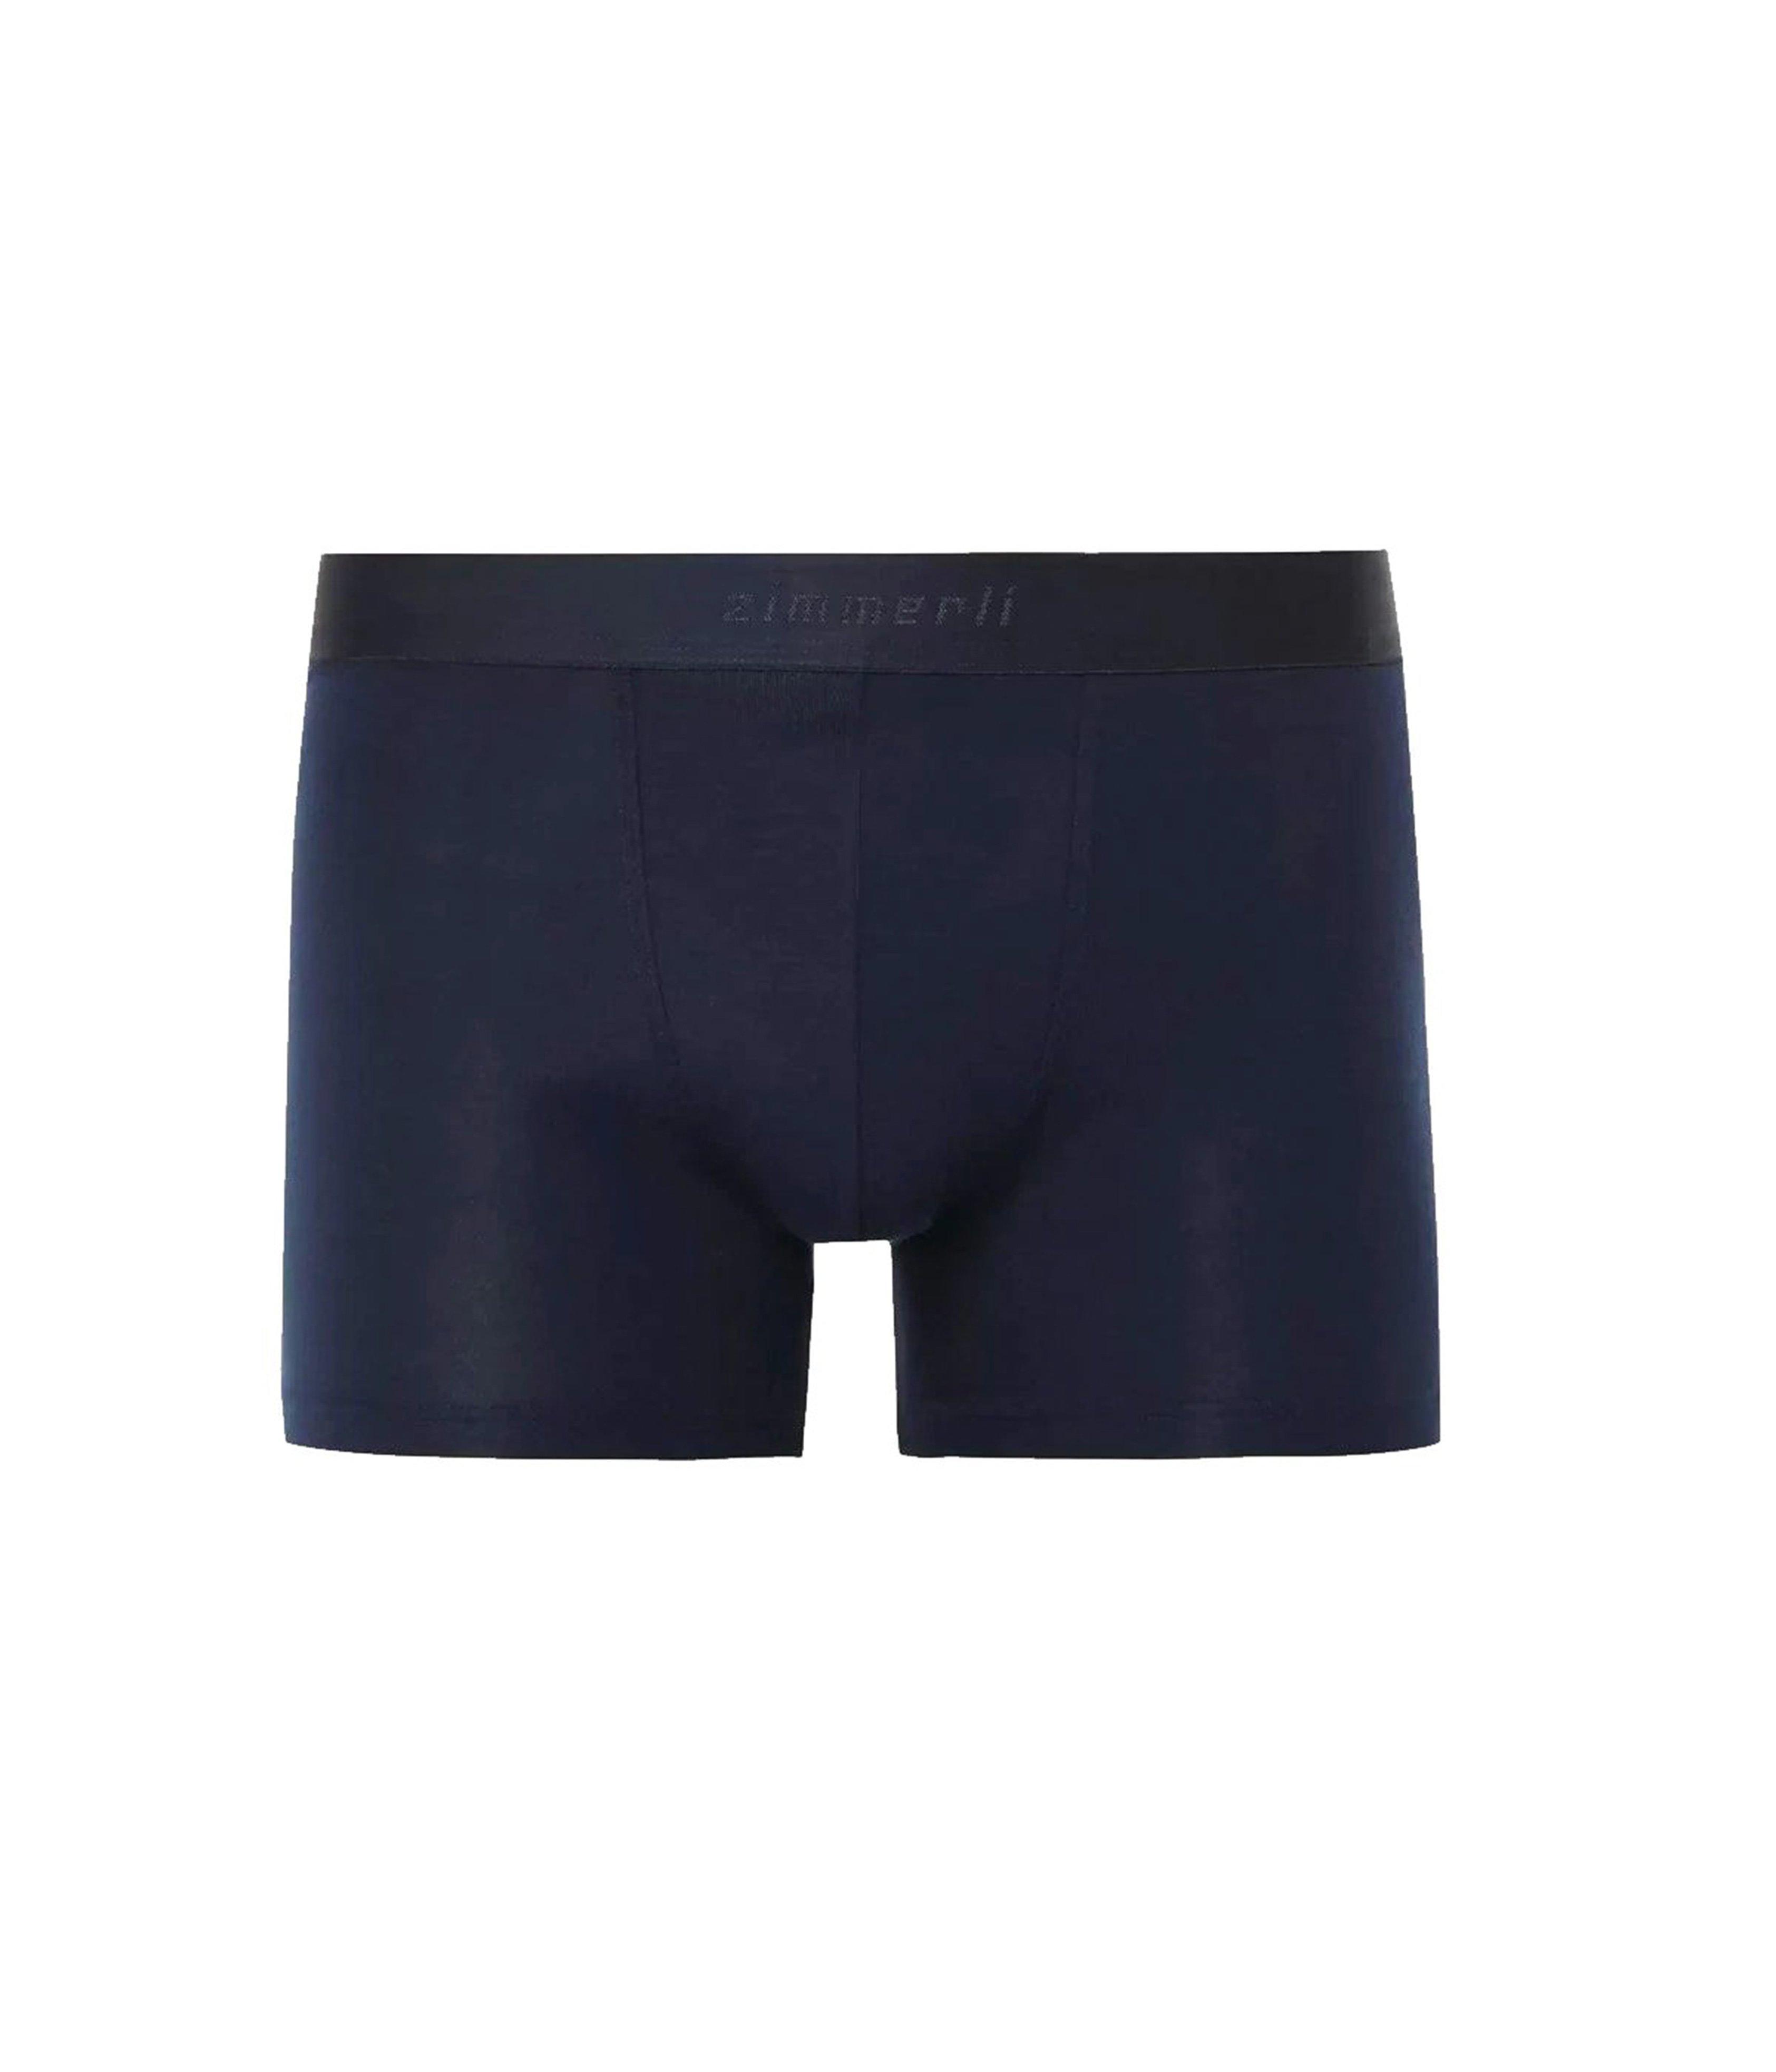 Micromodal Boxer Brief  image 0